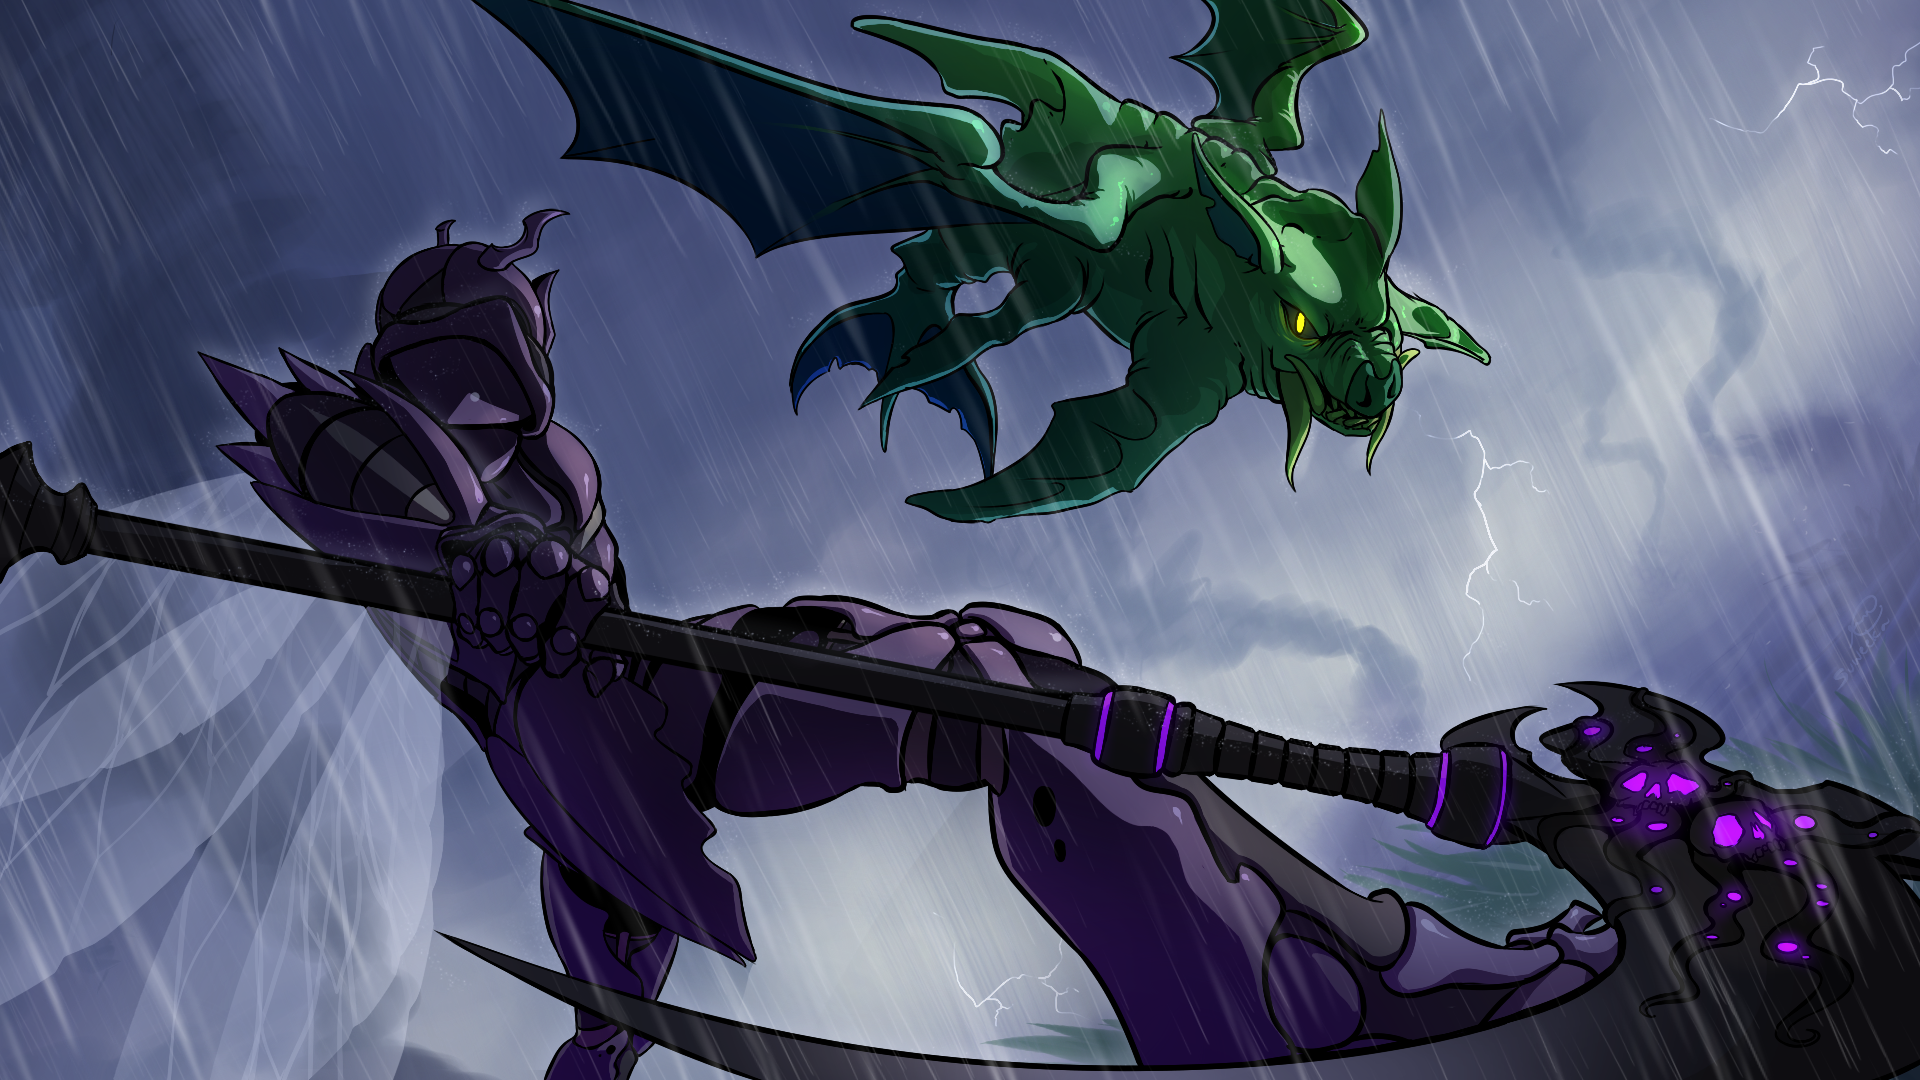 All terraria boss fight by Apolonahue1 on DeviantArt